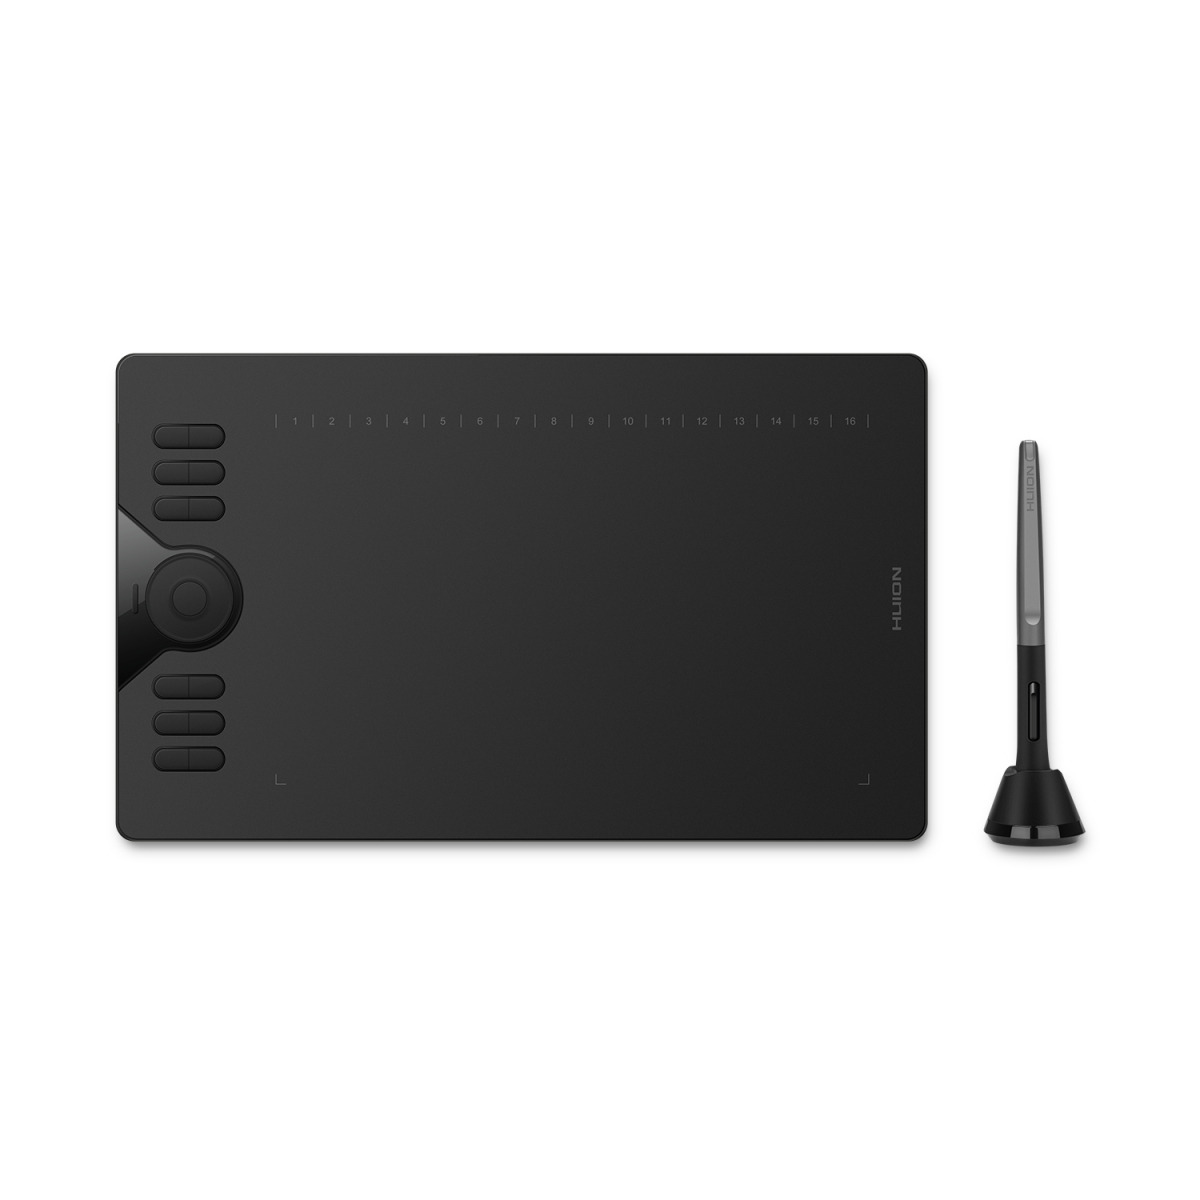 Huion The Best Huion Tablet For Online Tutoring